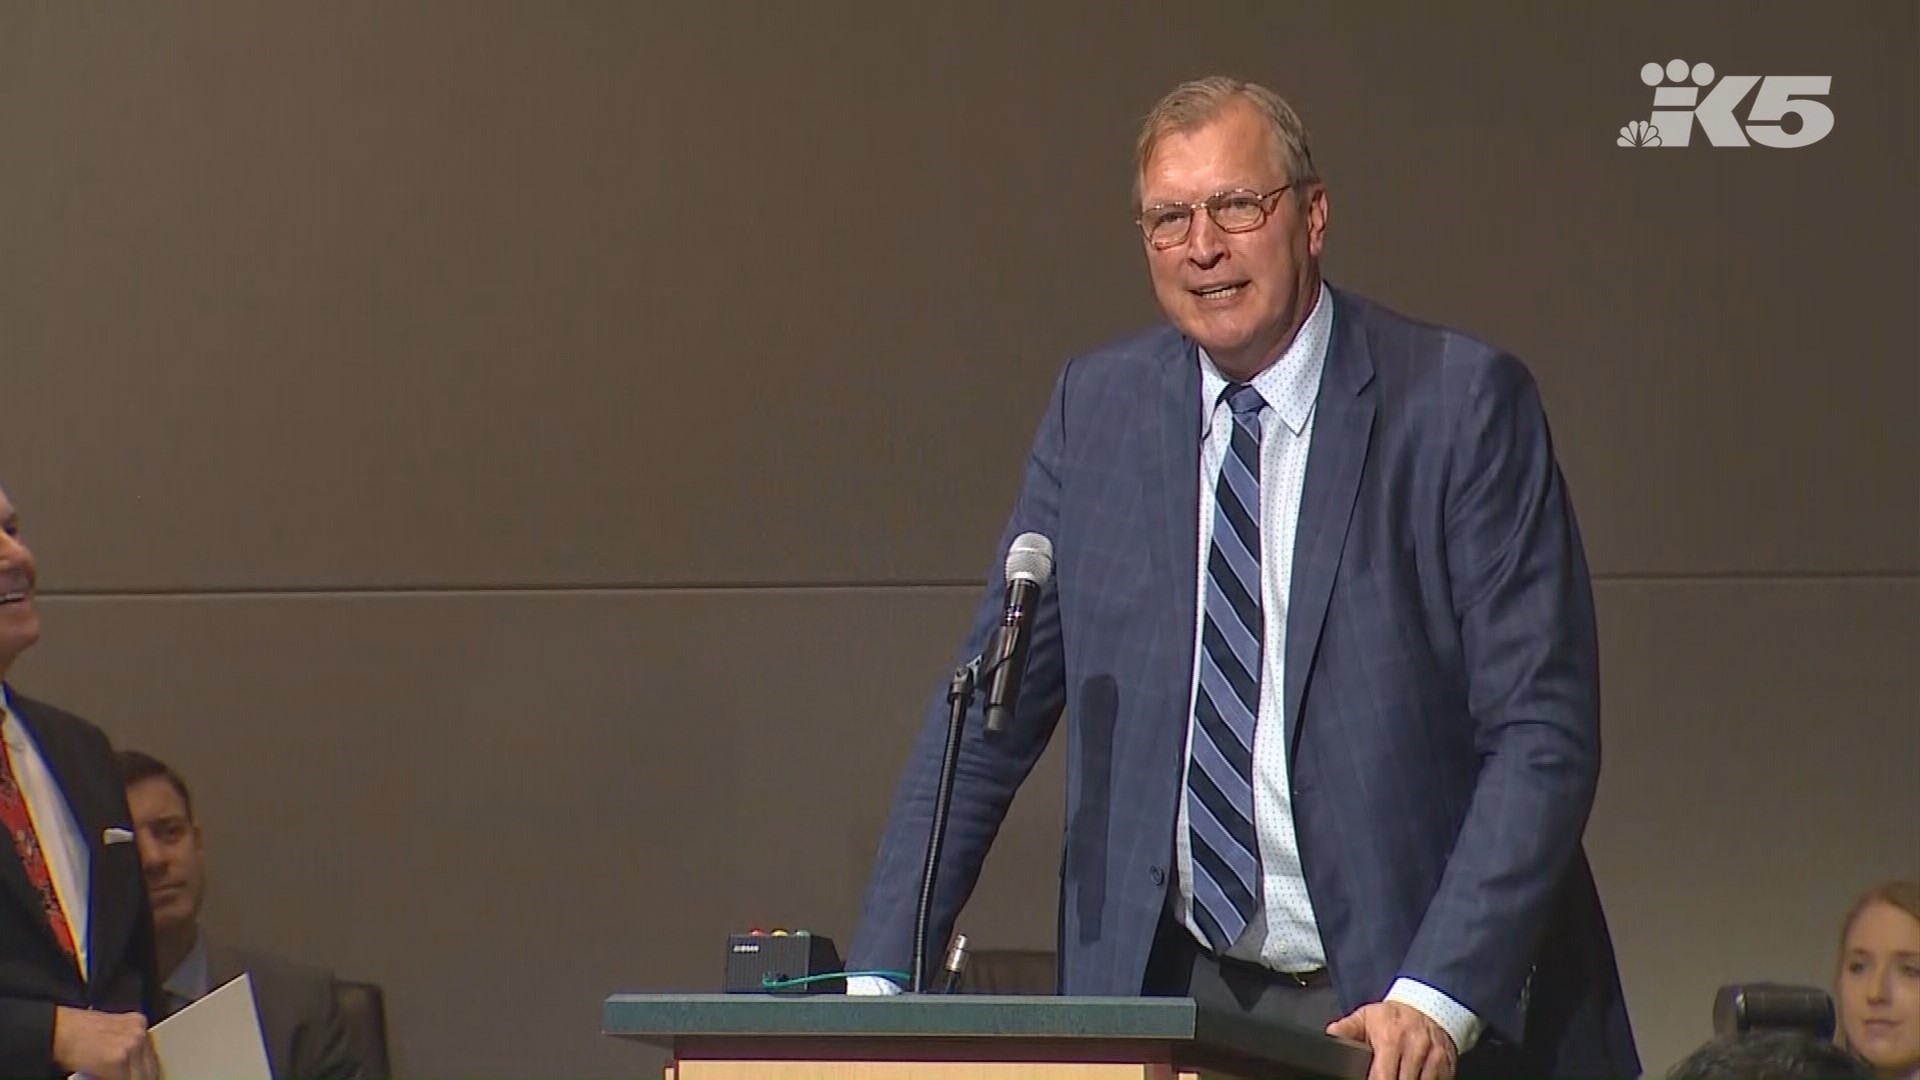 Jack Sikma, who helped lead the Sonics to a 1979 NBA championship, will be inducted into the Basketball Hall of Fame later this year